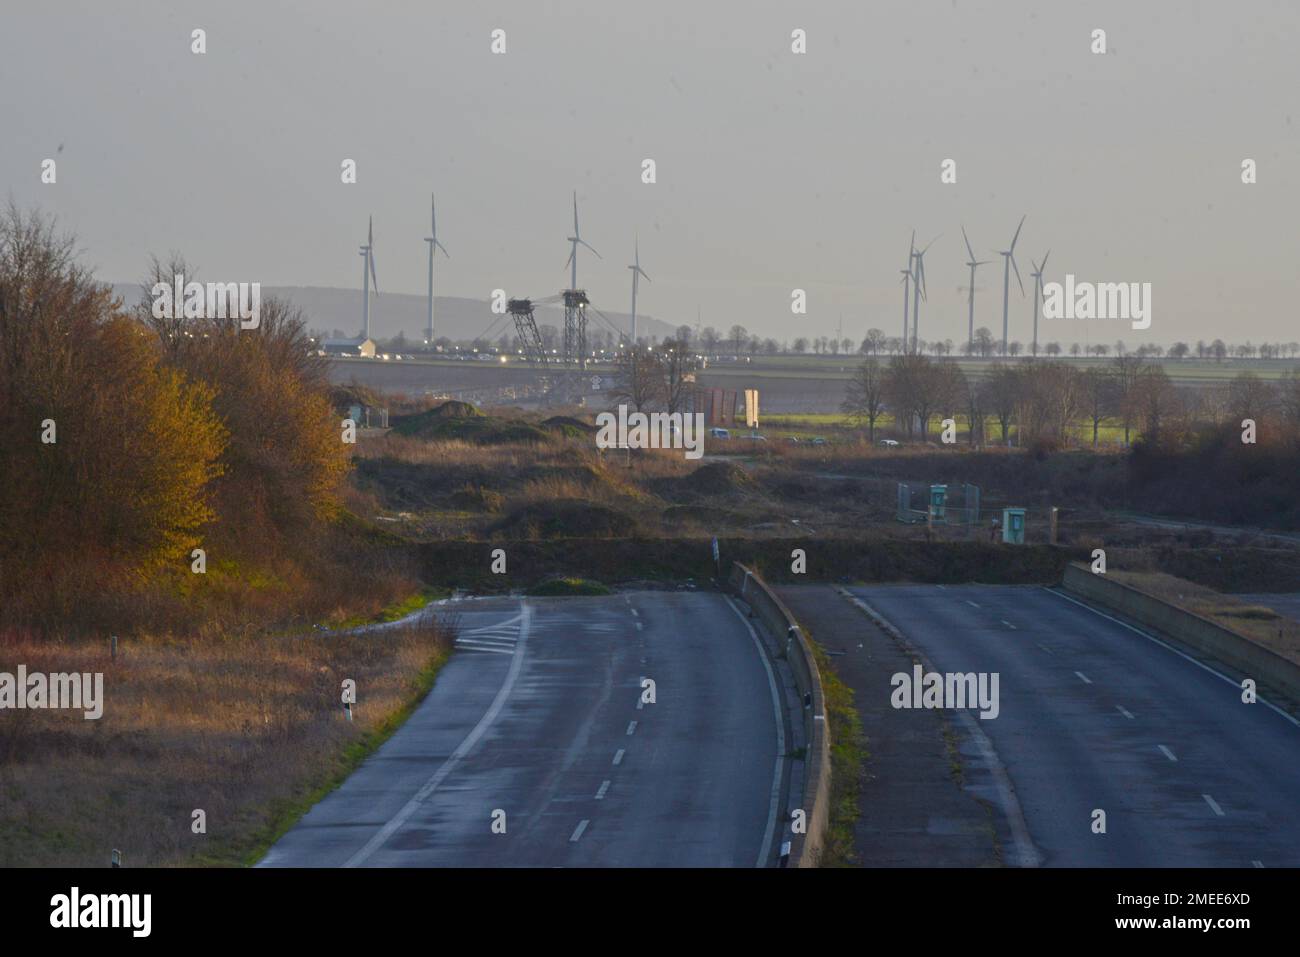 Cut off road at Garzweiler II lignite coal mine, Germany. Roads & villages have been removed for the mine expansion, site of climate  change protests Stock Photo